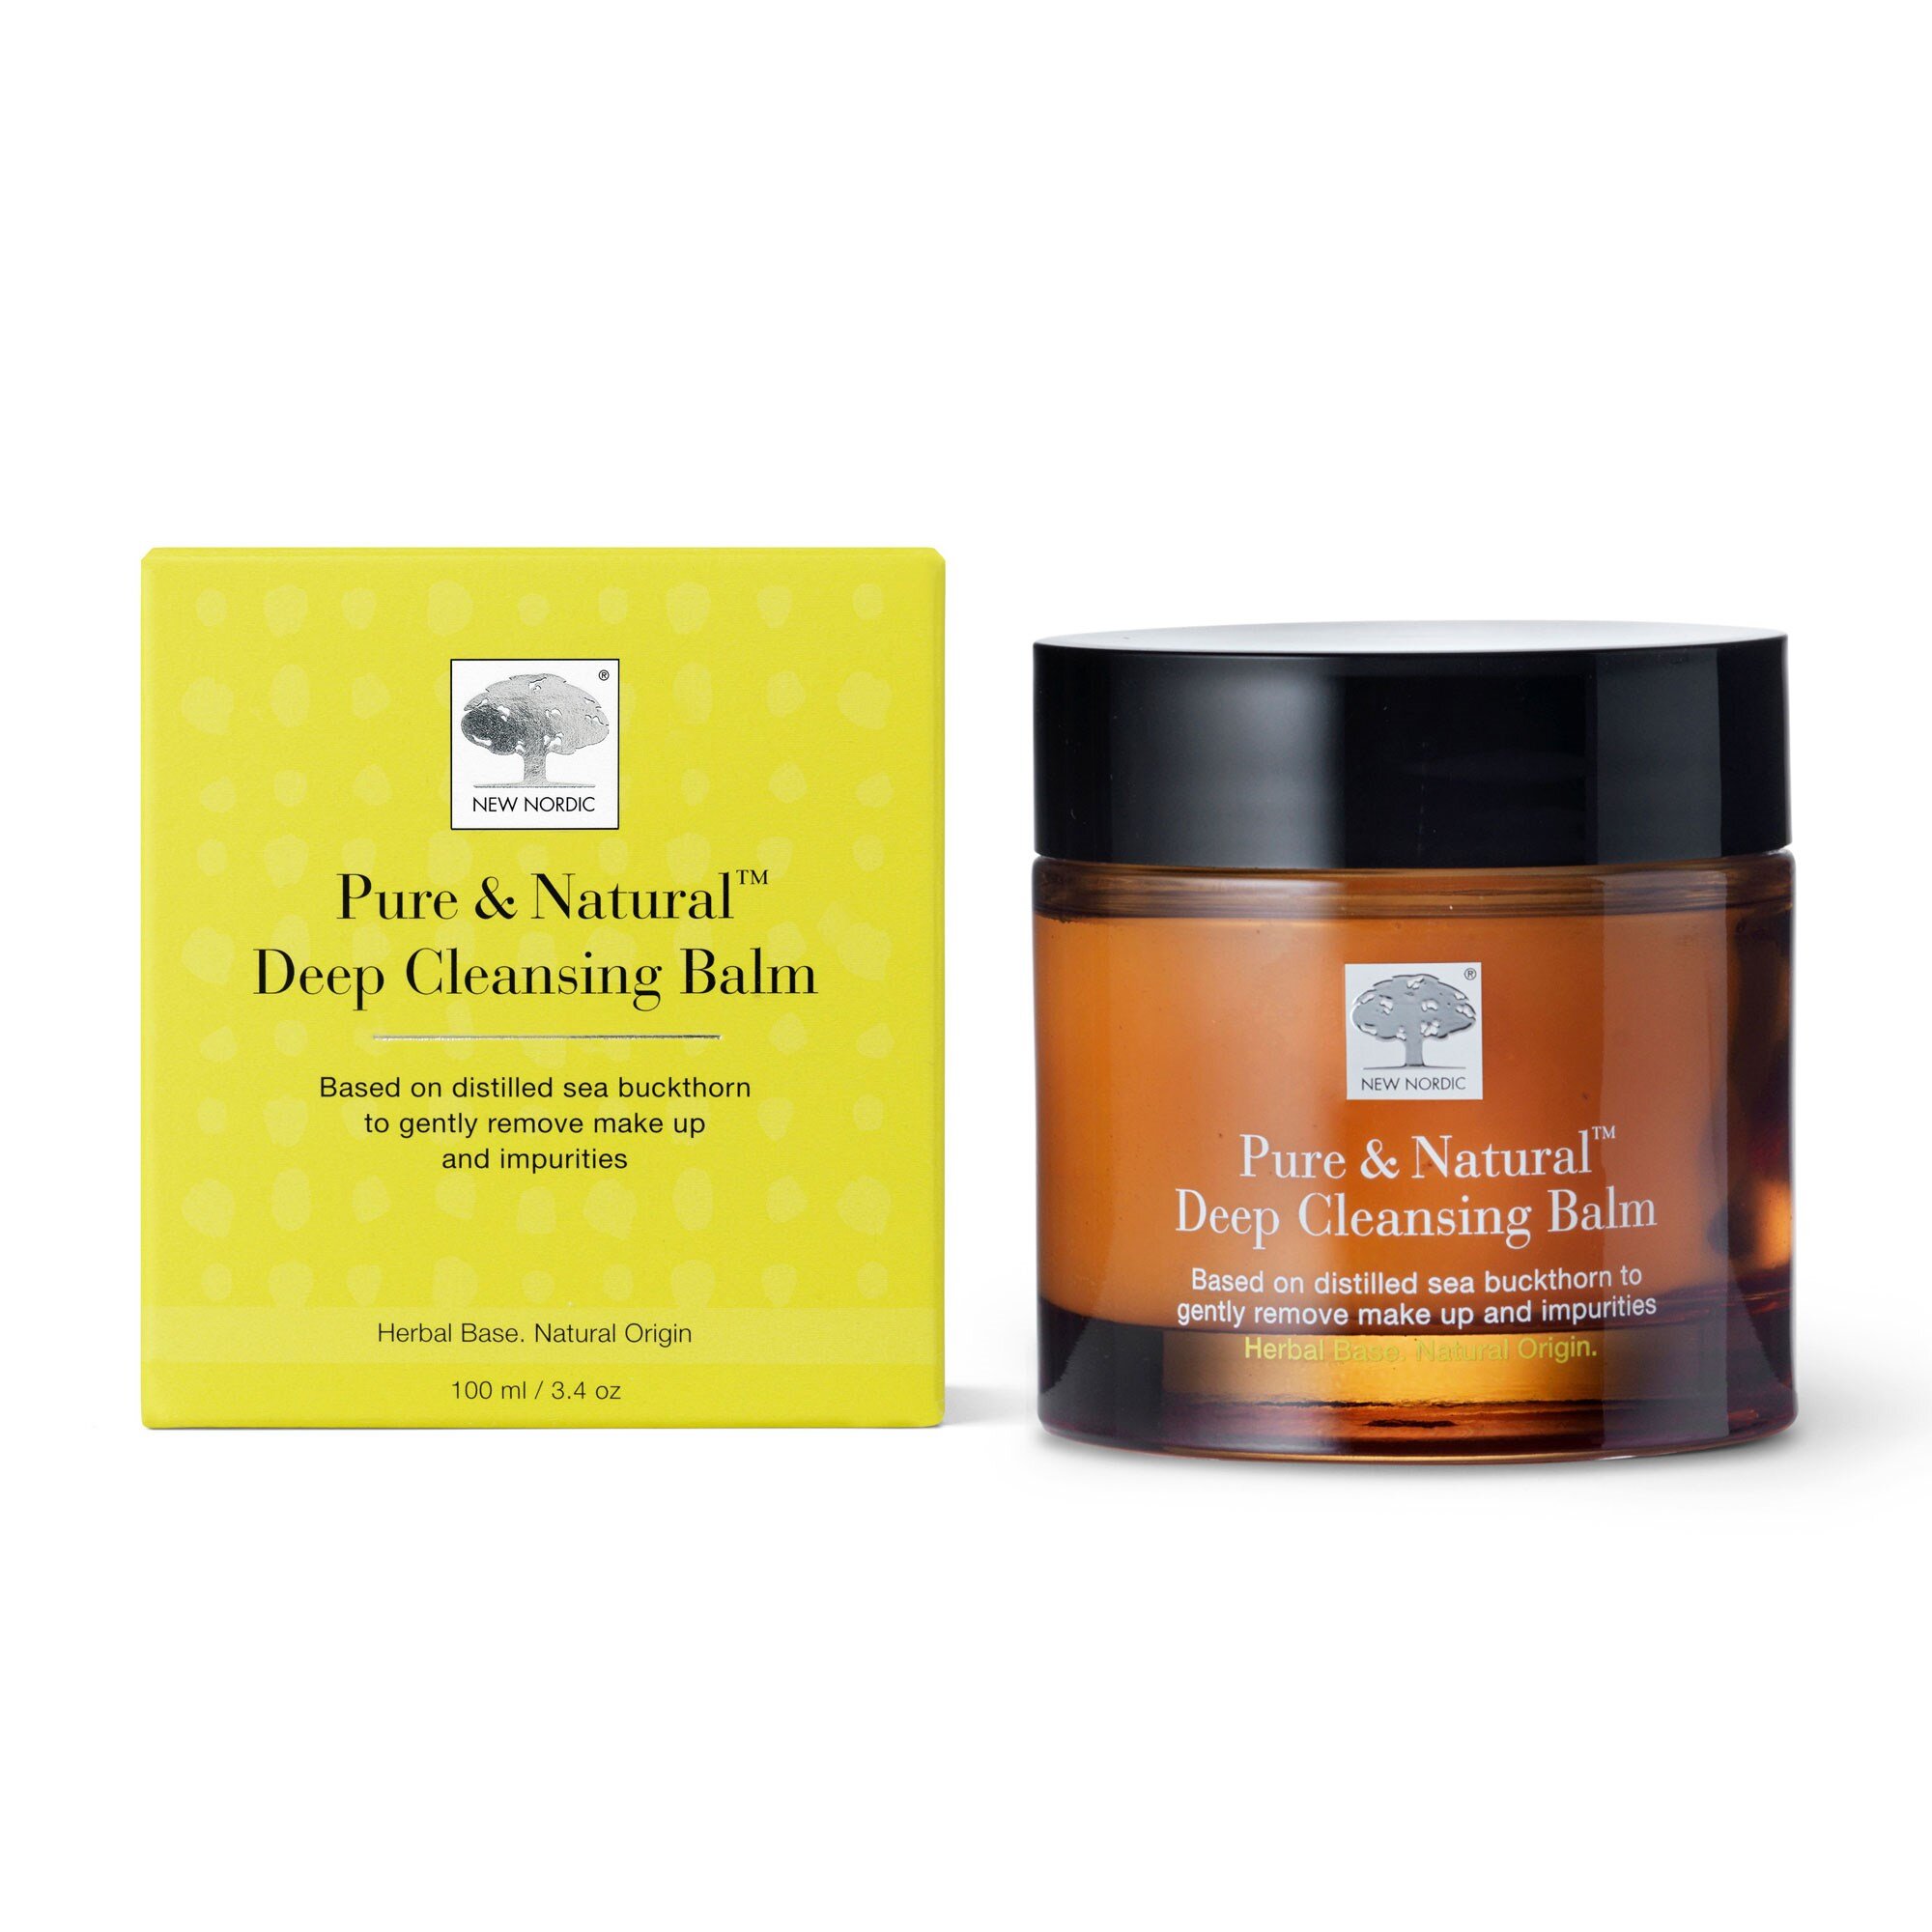 Pure & Natural Deep Cleansing Balm